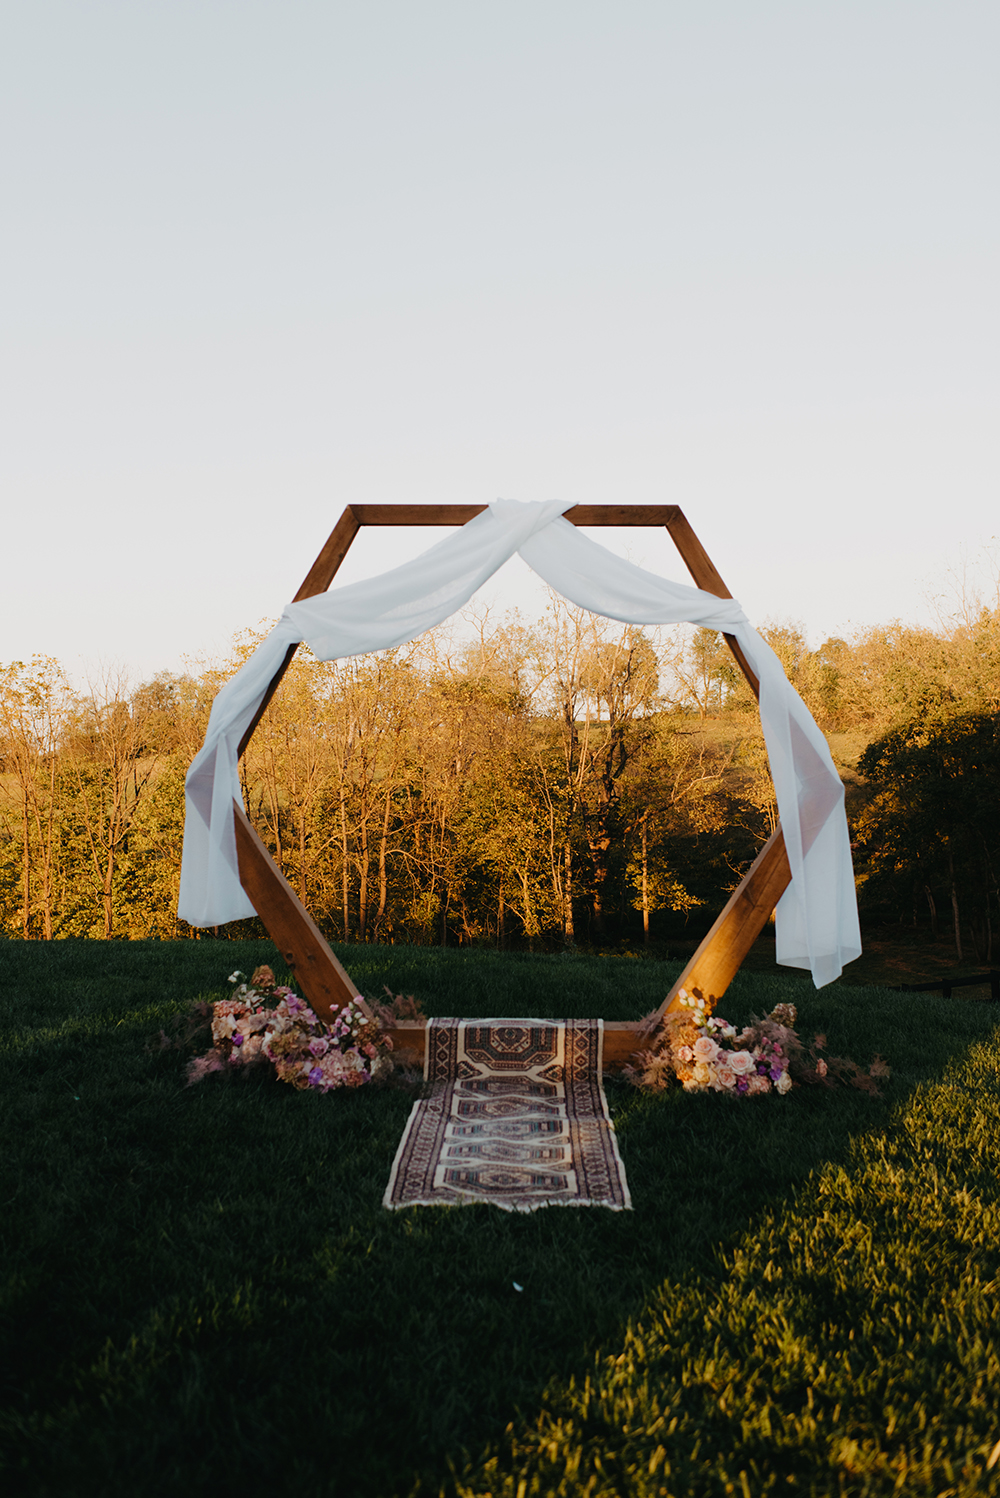 The wedding arch was done with white fabric, lush blooms and a boho rug